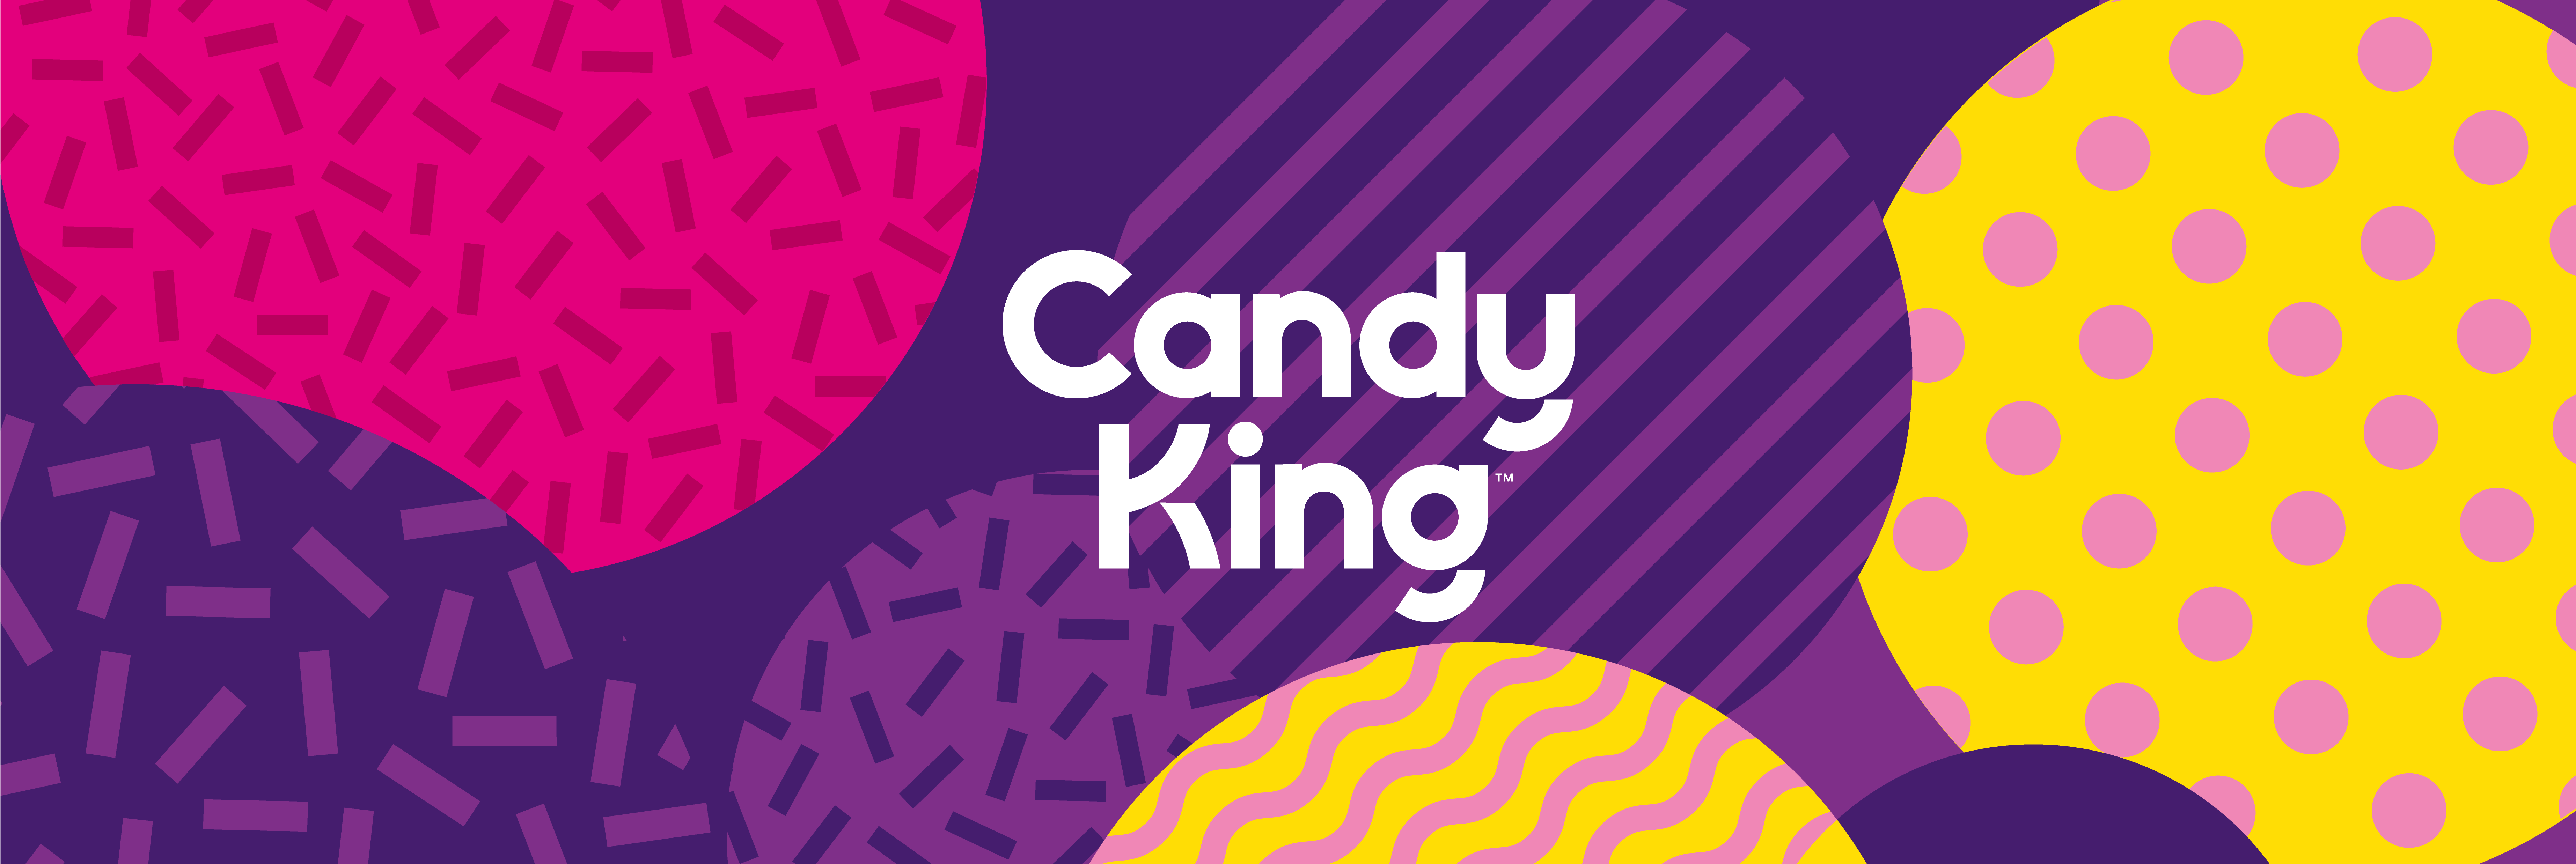 Candy King banner